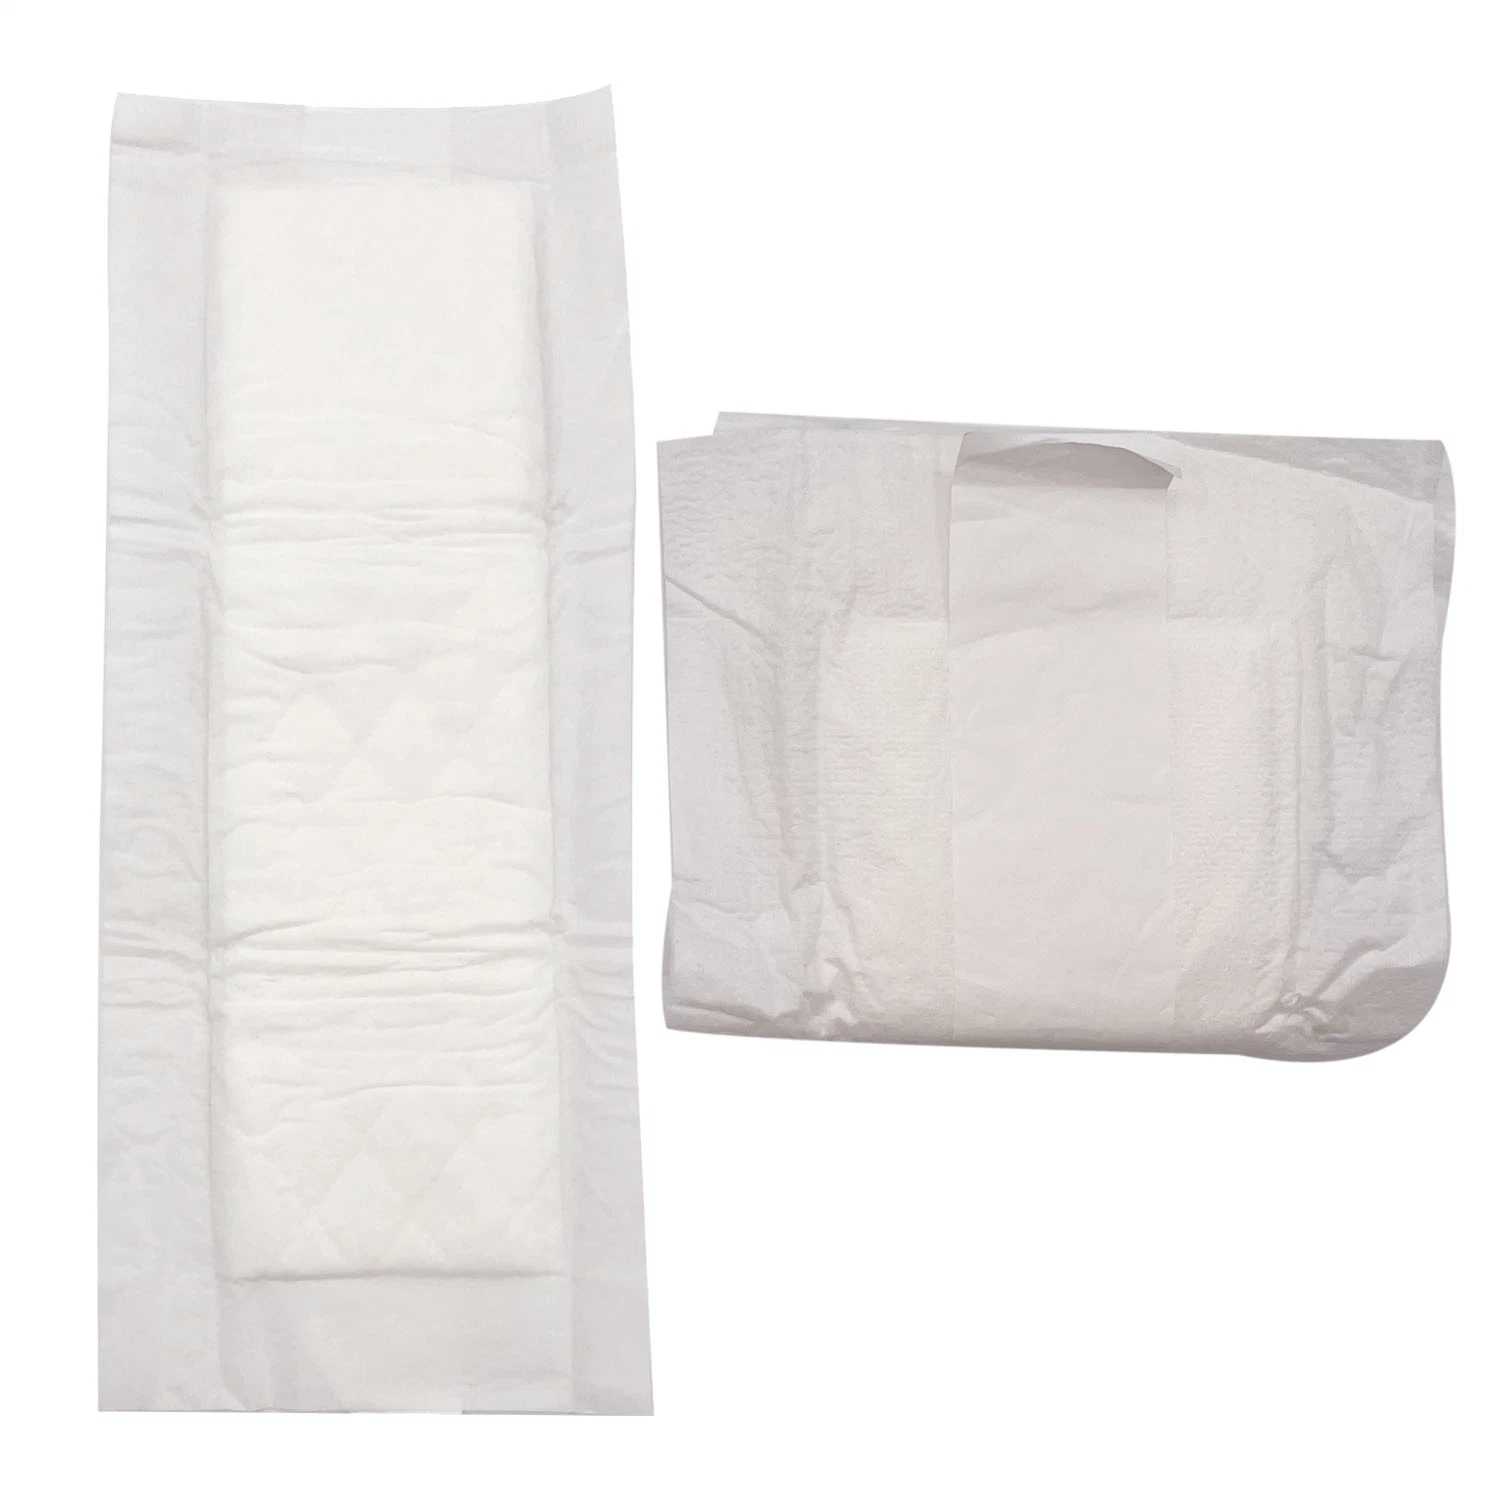 Best Selling Adult Diaper Insert Pad Disposable Insert Incontinence Pad